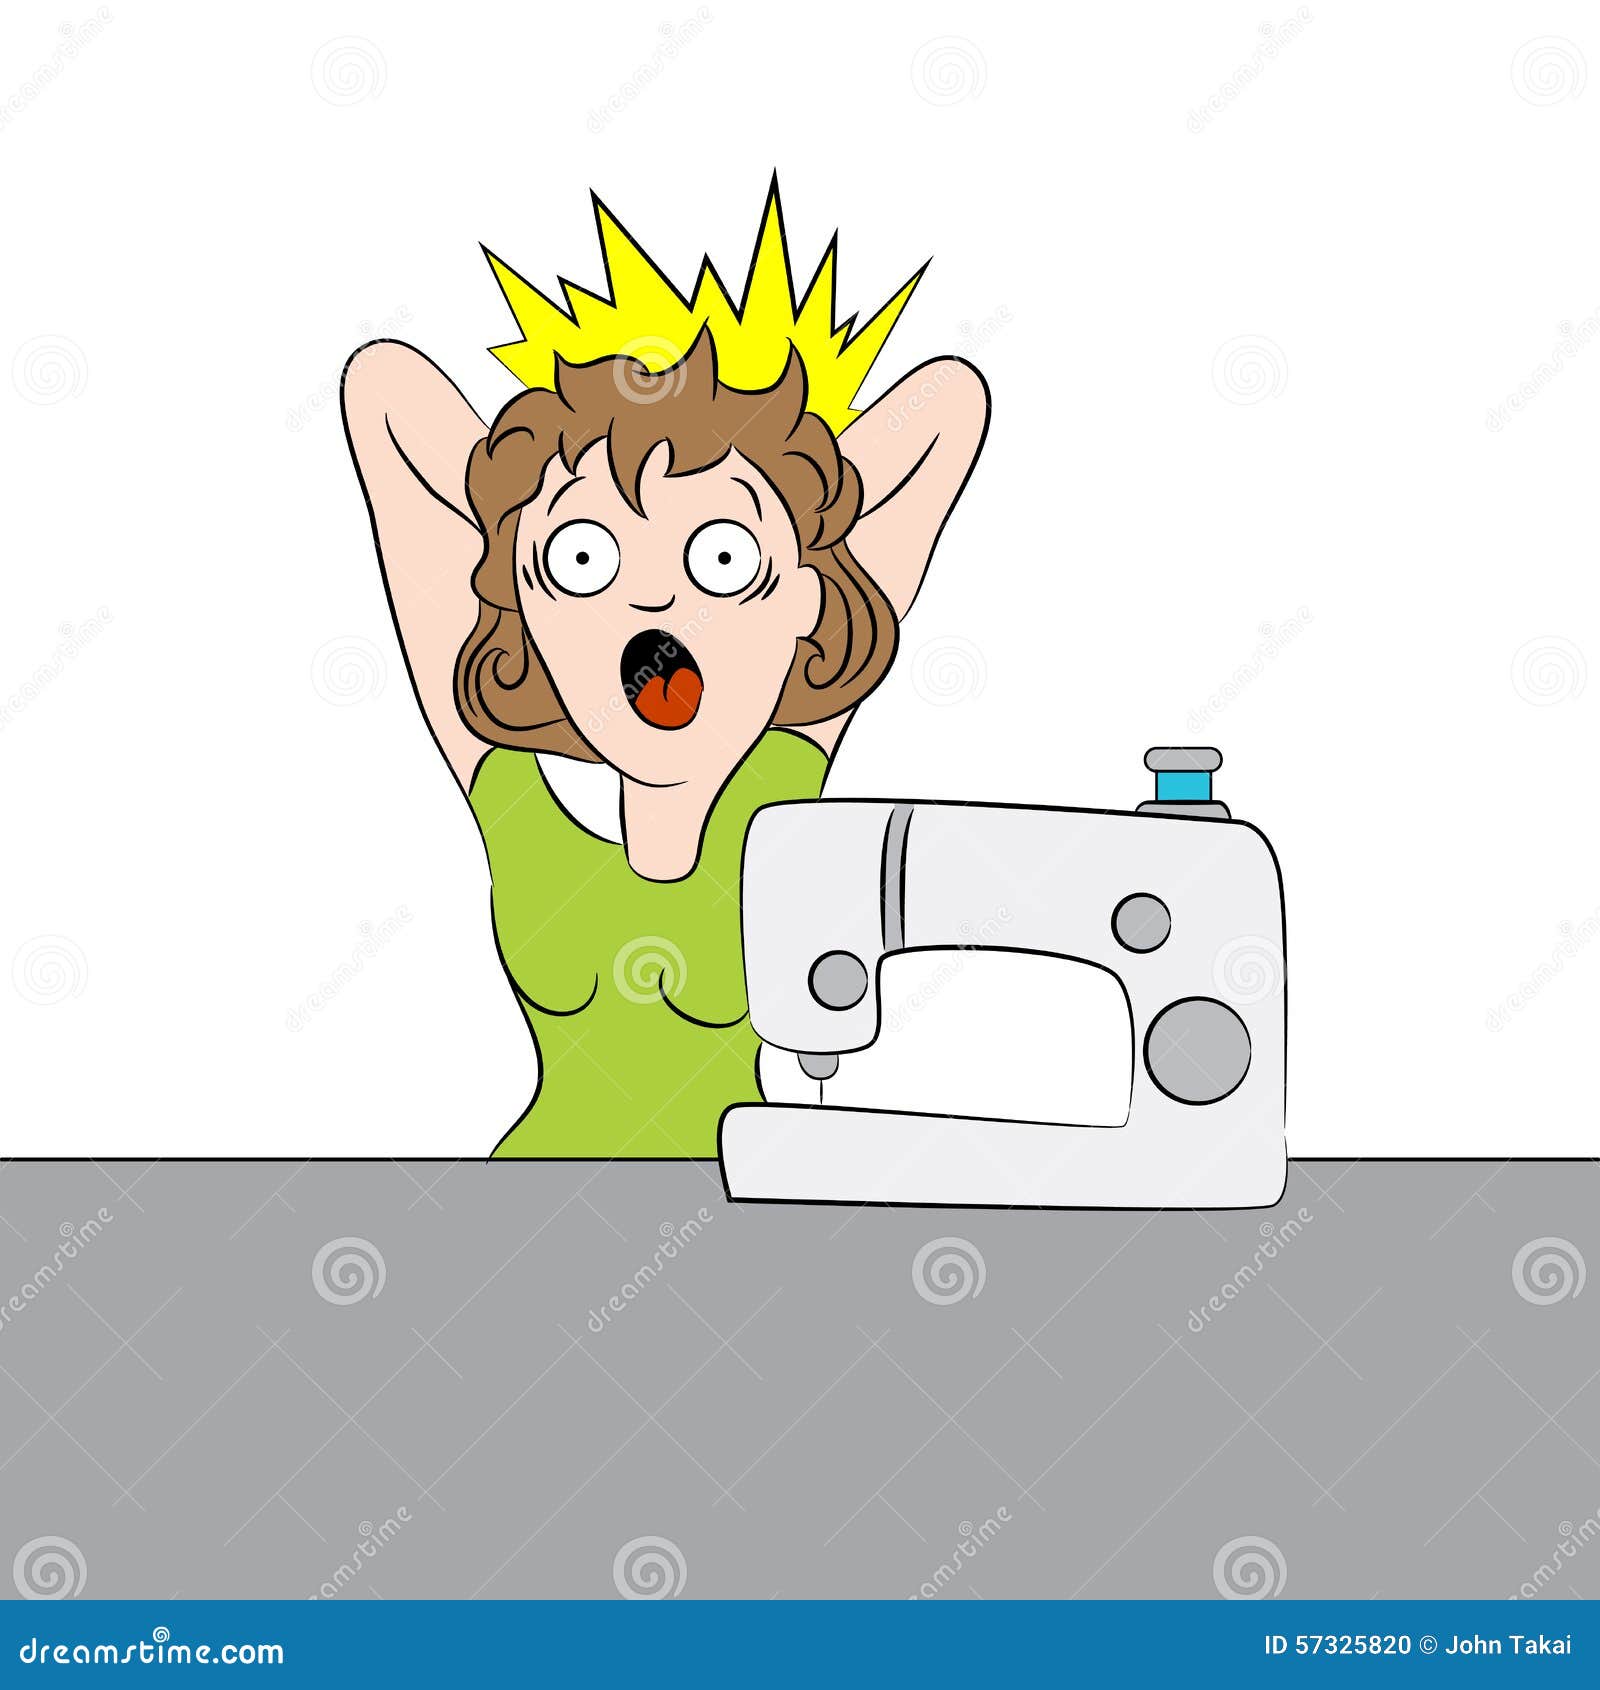 woman-frustrated-sewing-machine-cartoon-image-who-upset-trying-to-learn-how-to-use-57325820.jpg